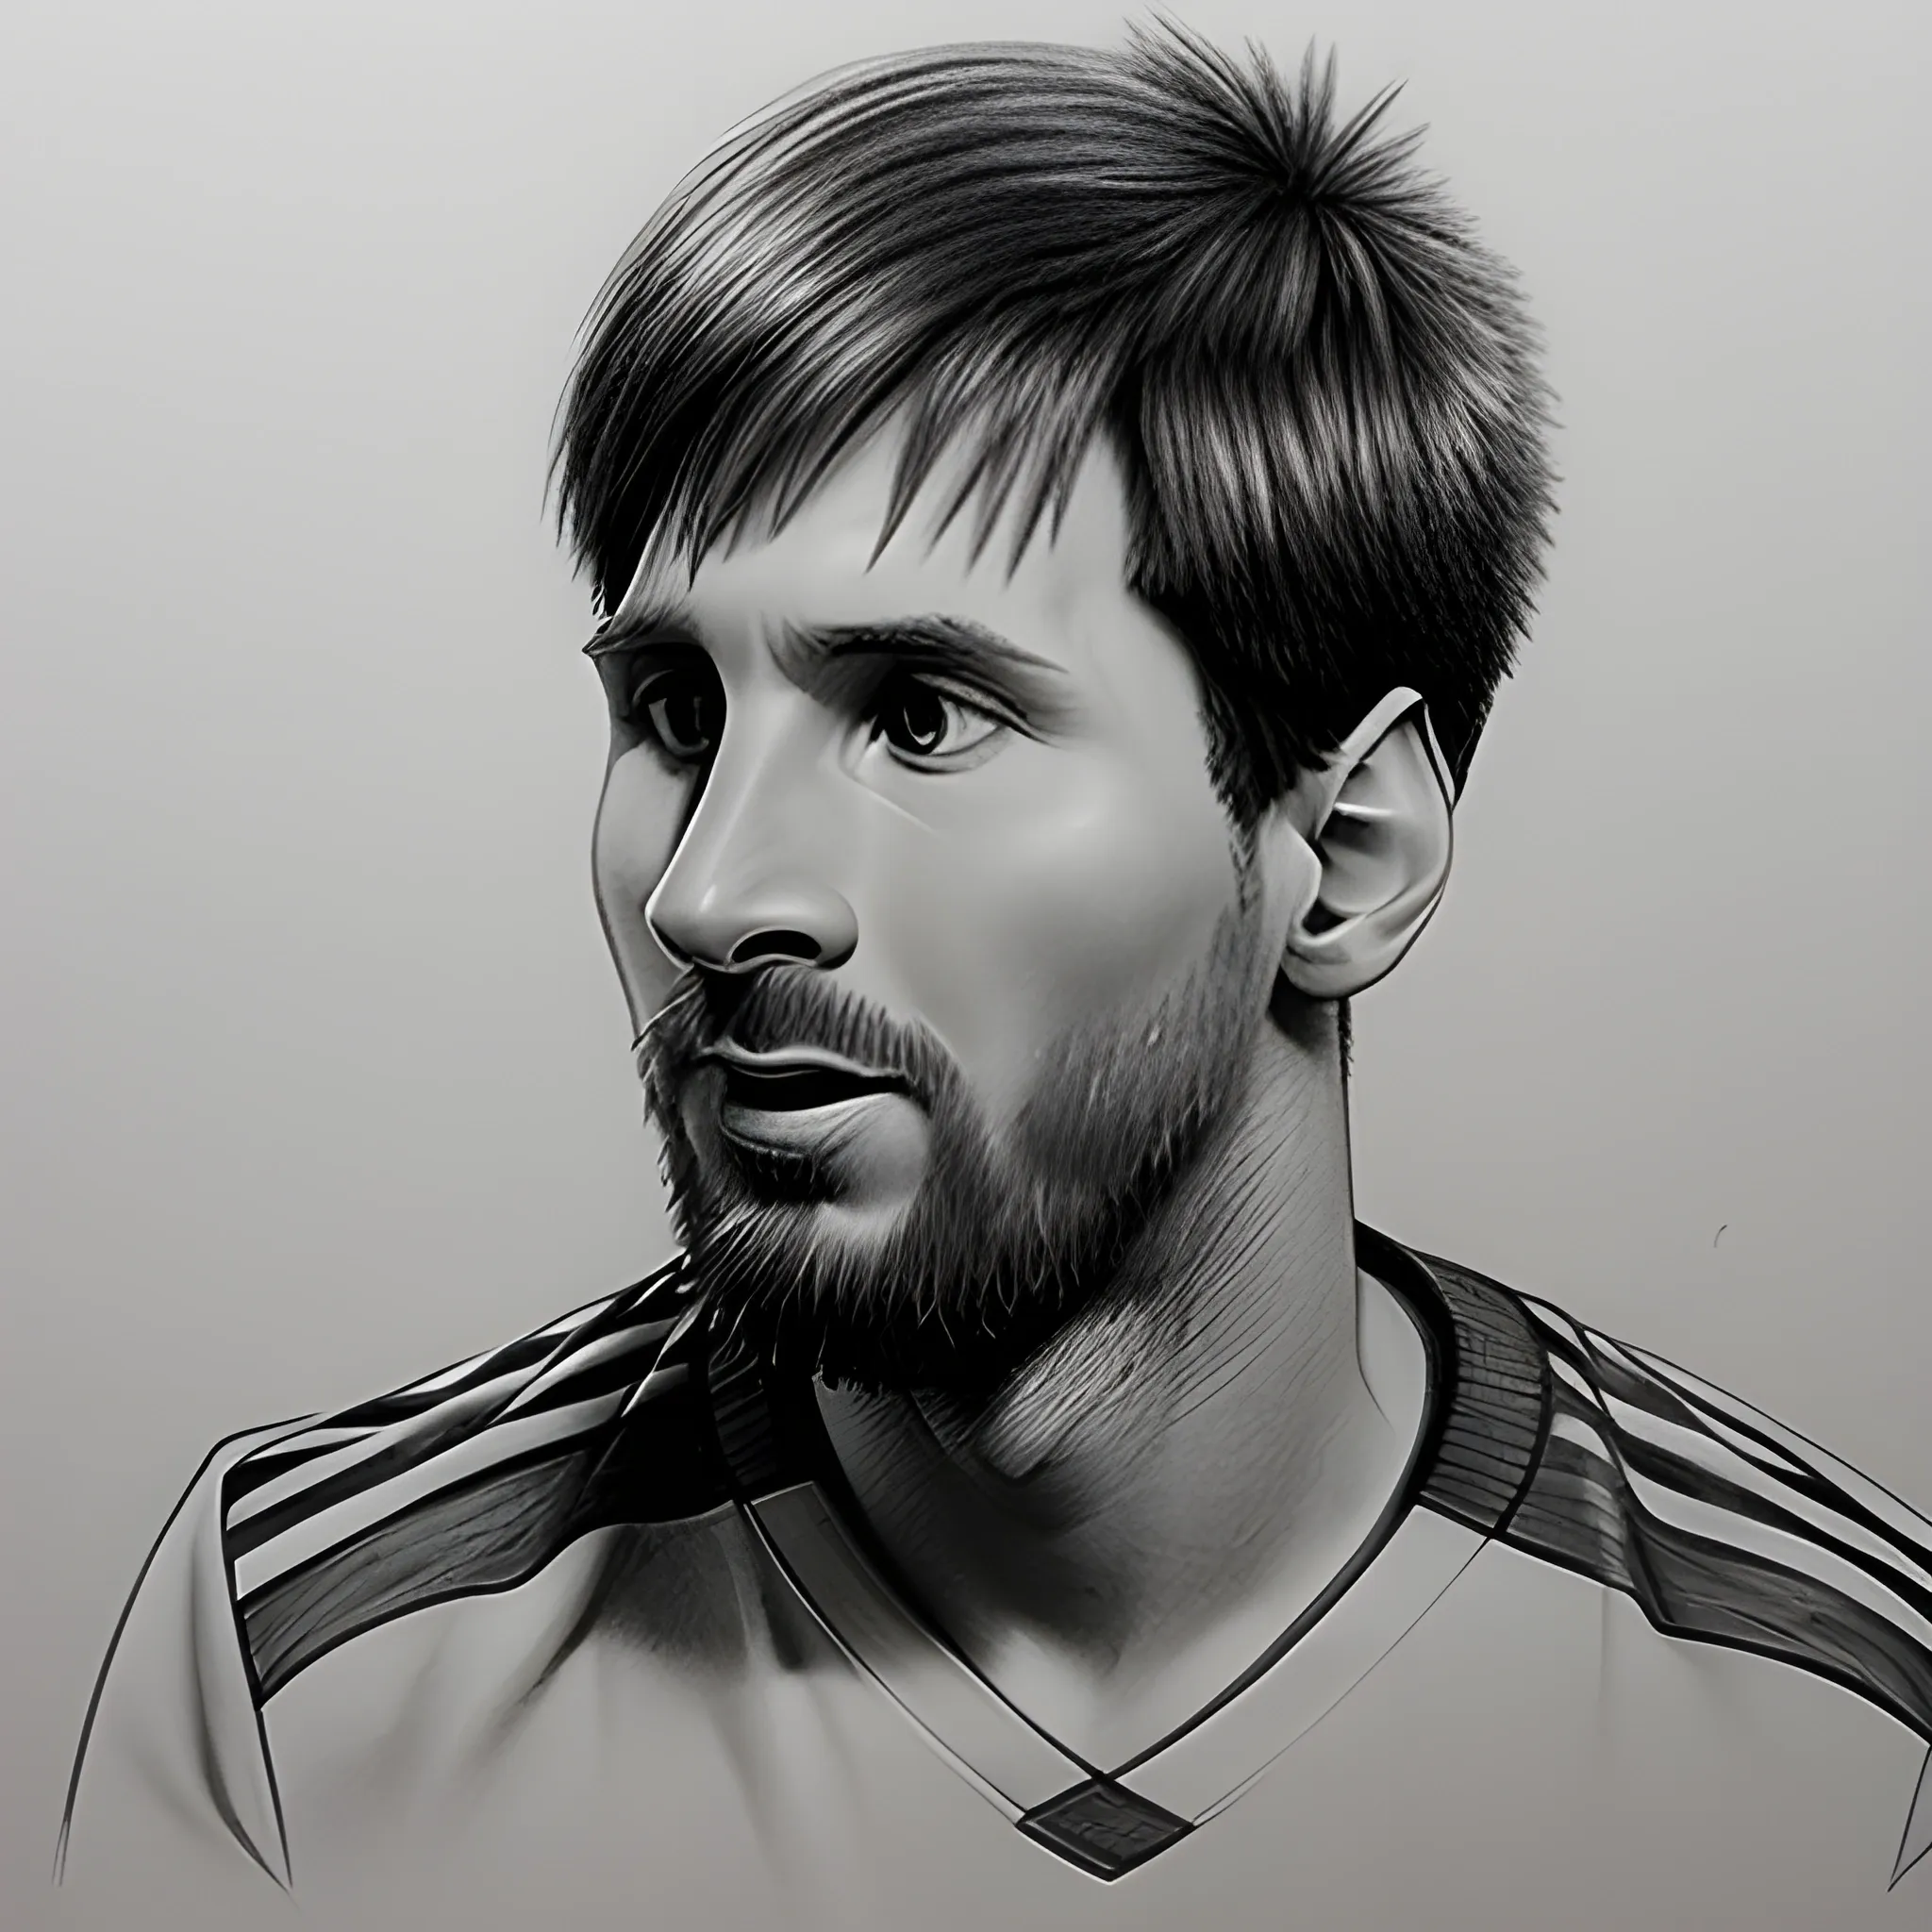 How to draw Lionel messi || Lionel Messi pencil sketch - YouTube